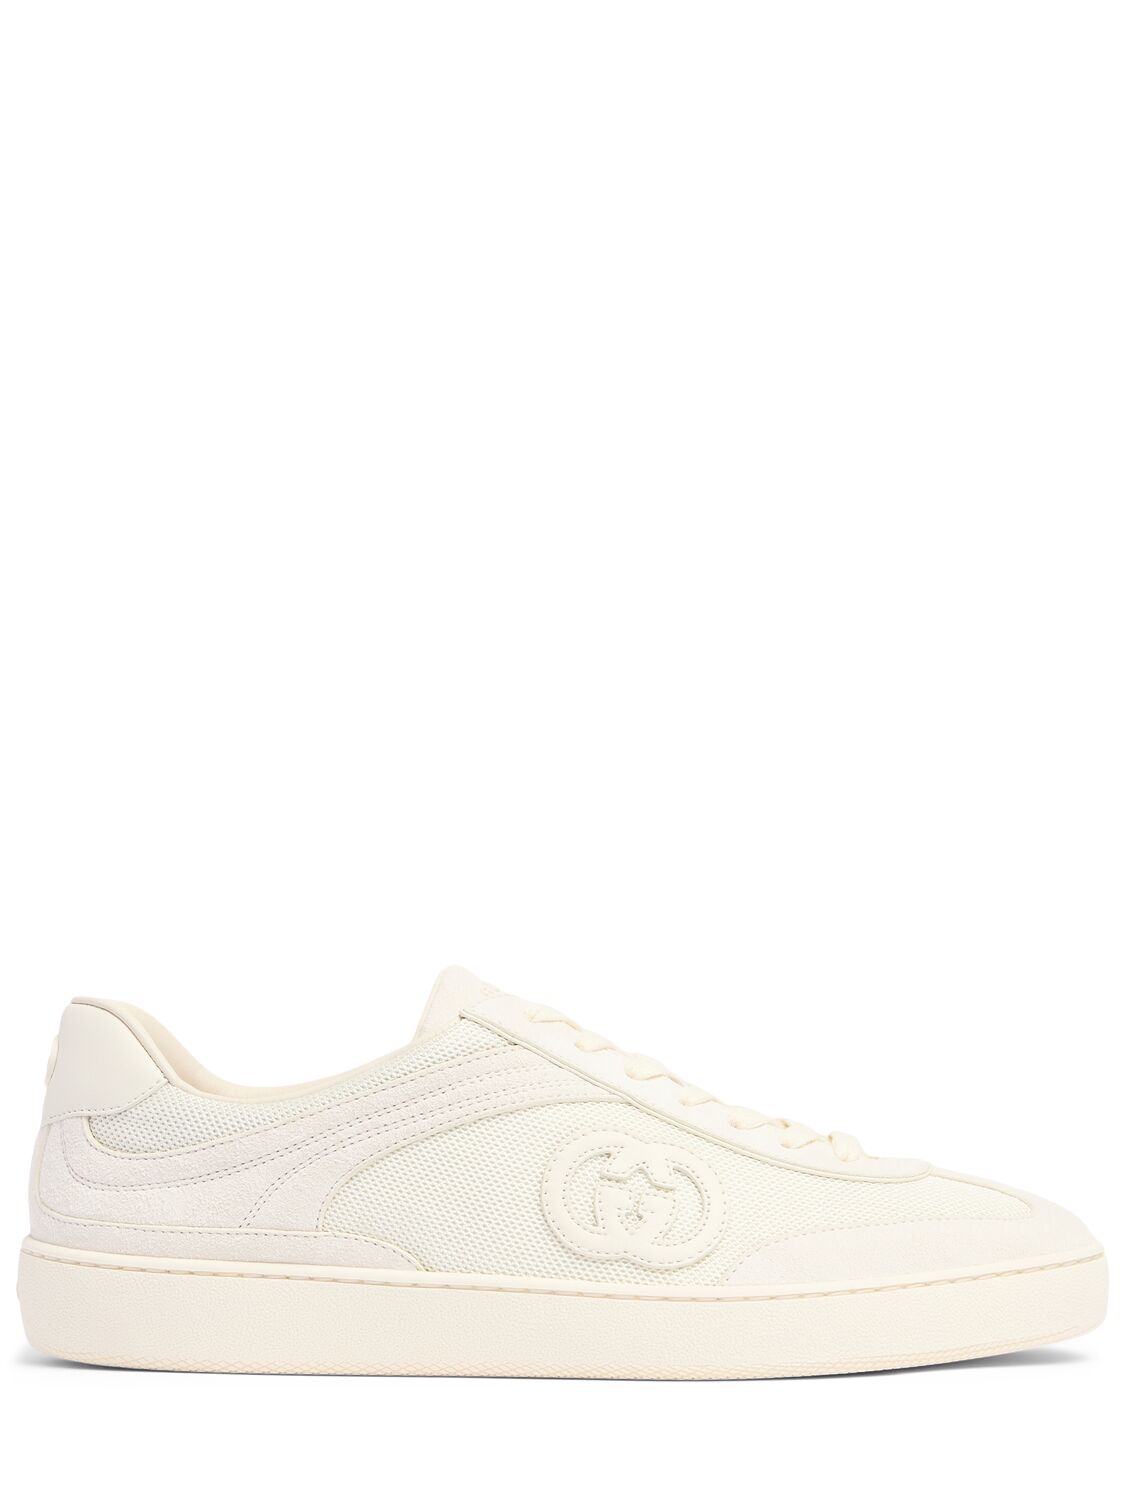 Gucci G74 Gg Suede & Fabric Sneakers In Off White